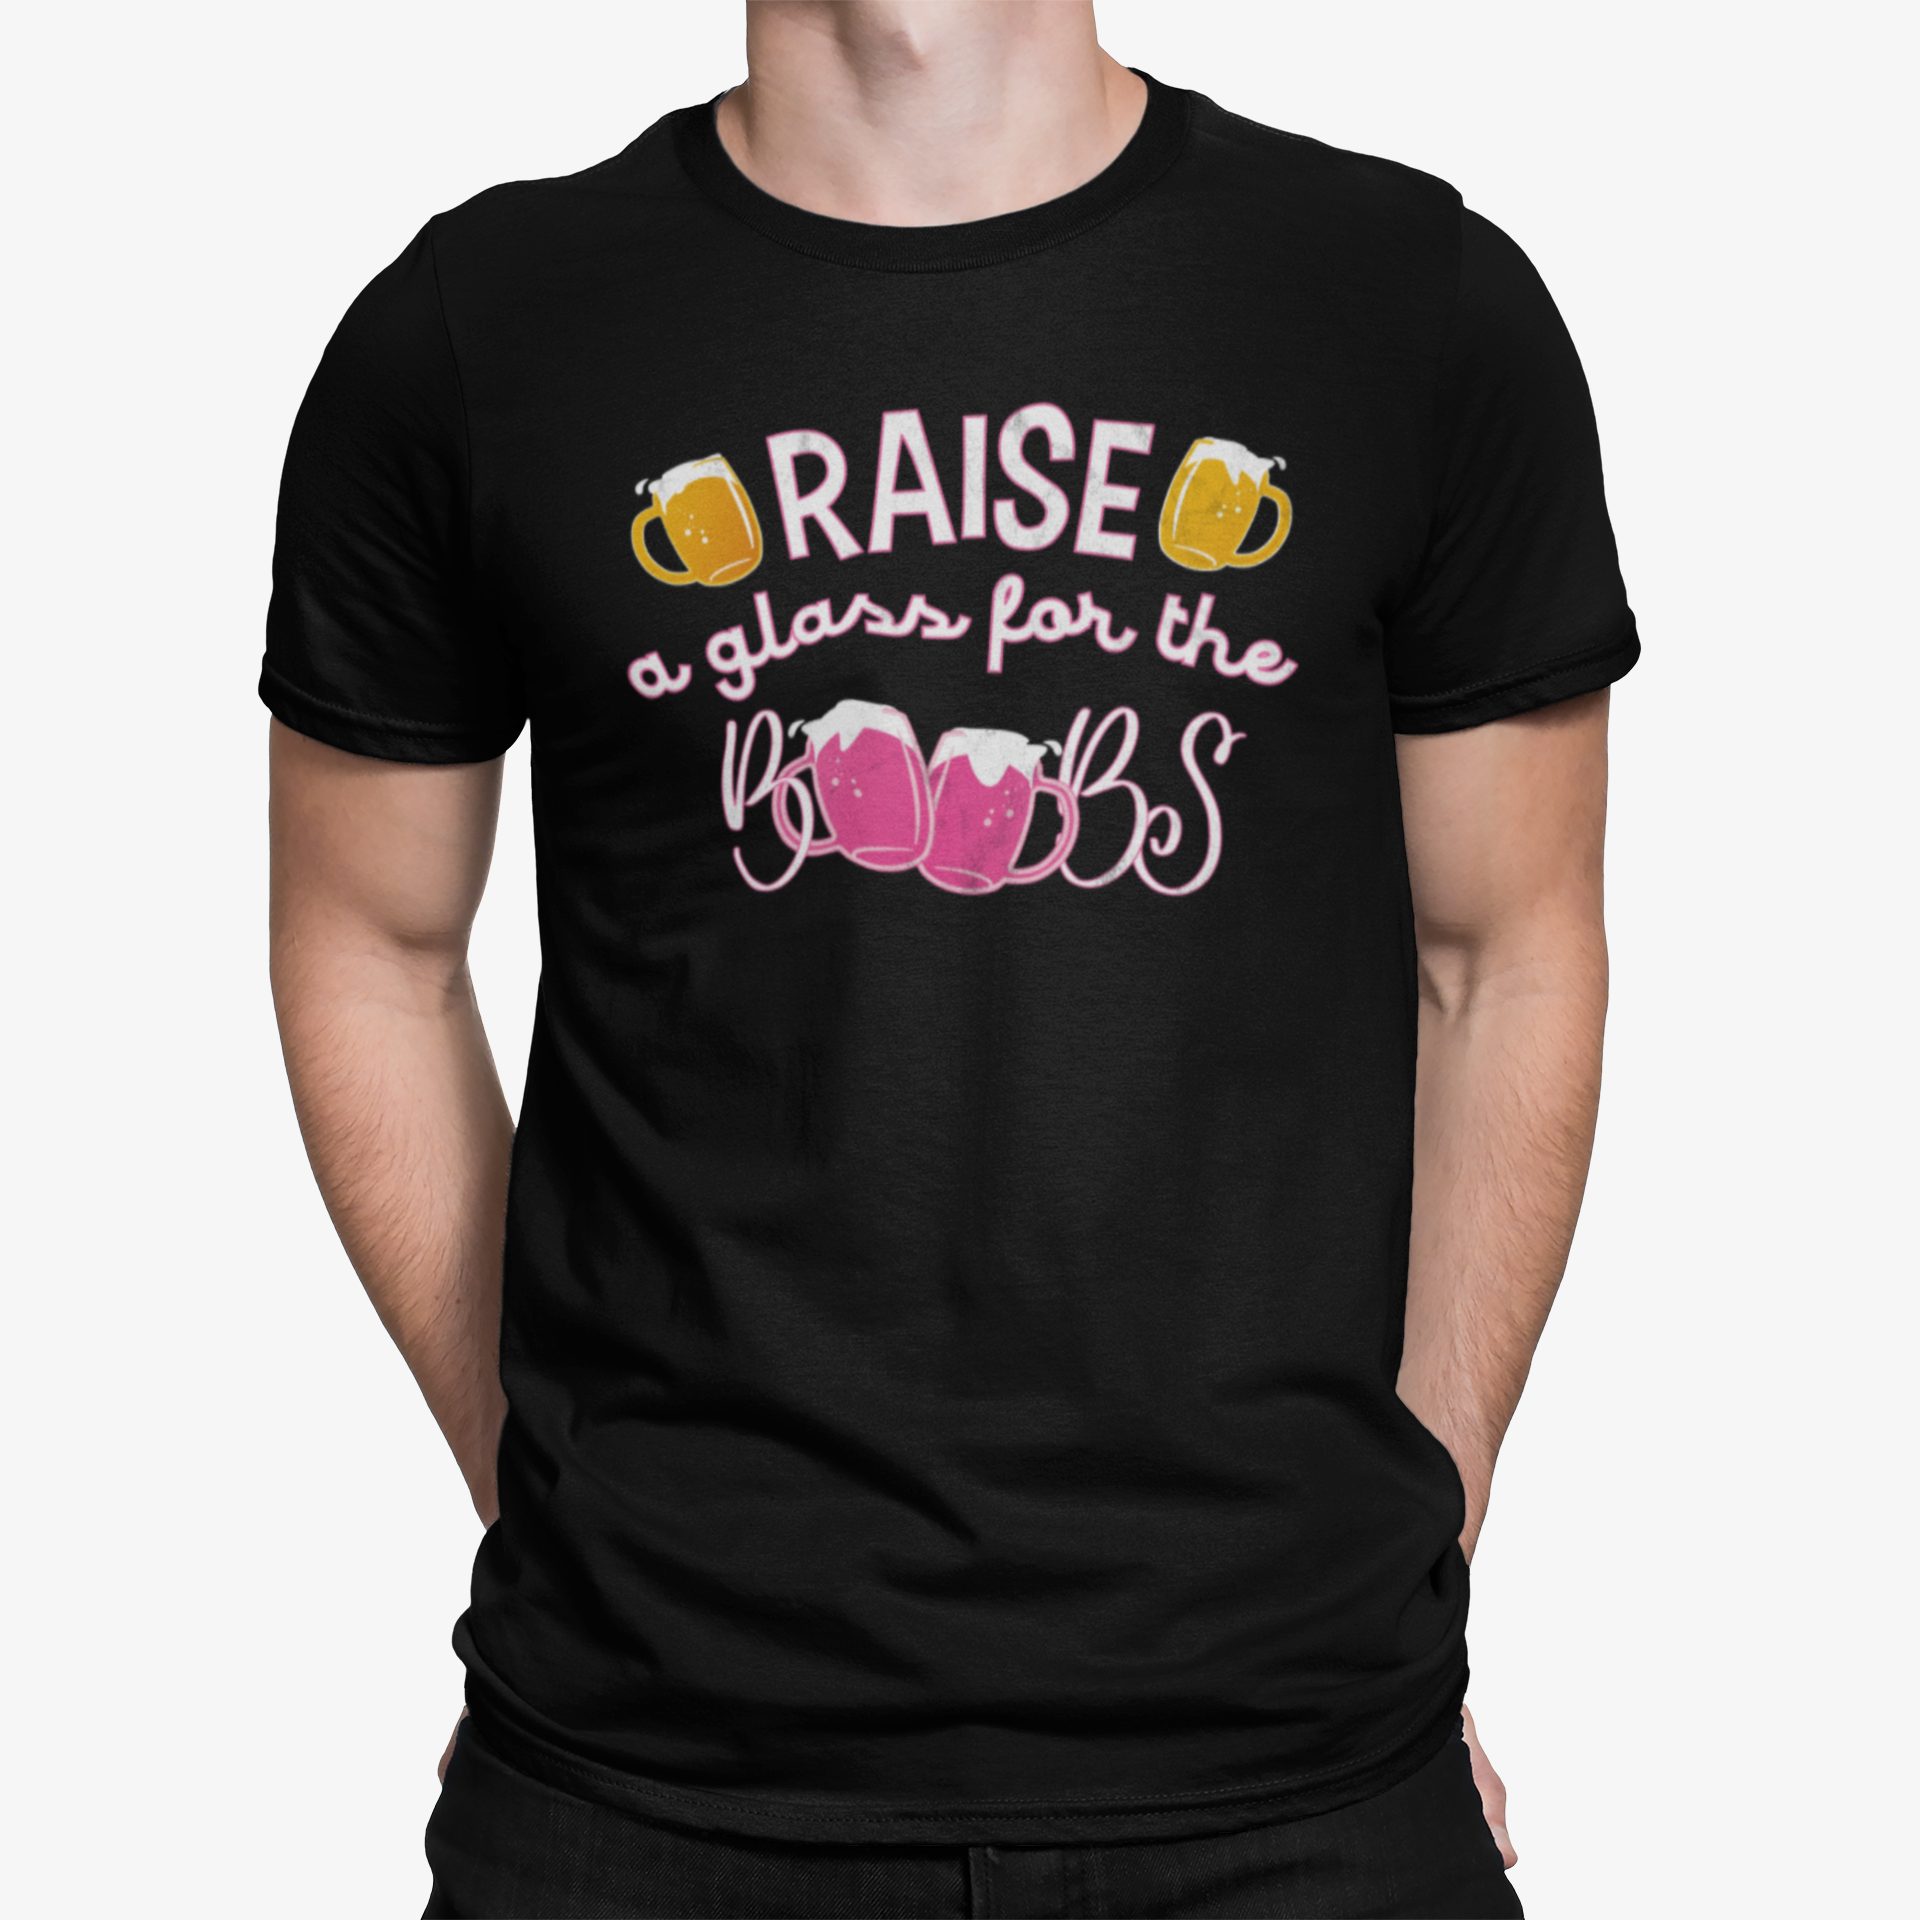 Raise A Glass For The Boobs Breast Cancer Awareness T-Shirt